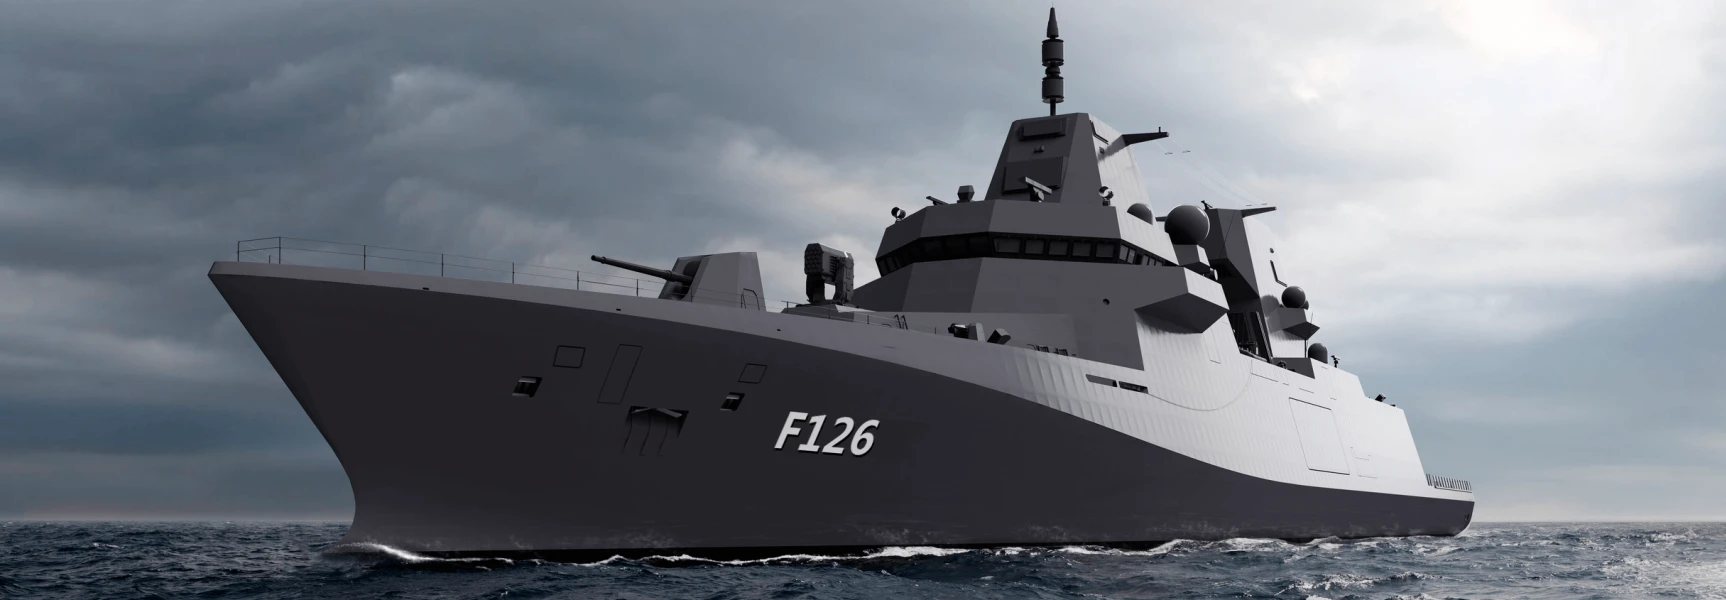 eBlue_economy_Damen Naval to employ DC-grid power generation and distribution system on board of German Navy F126 frigates